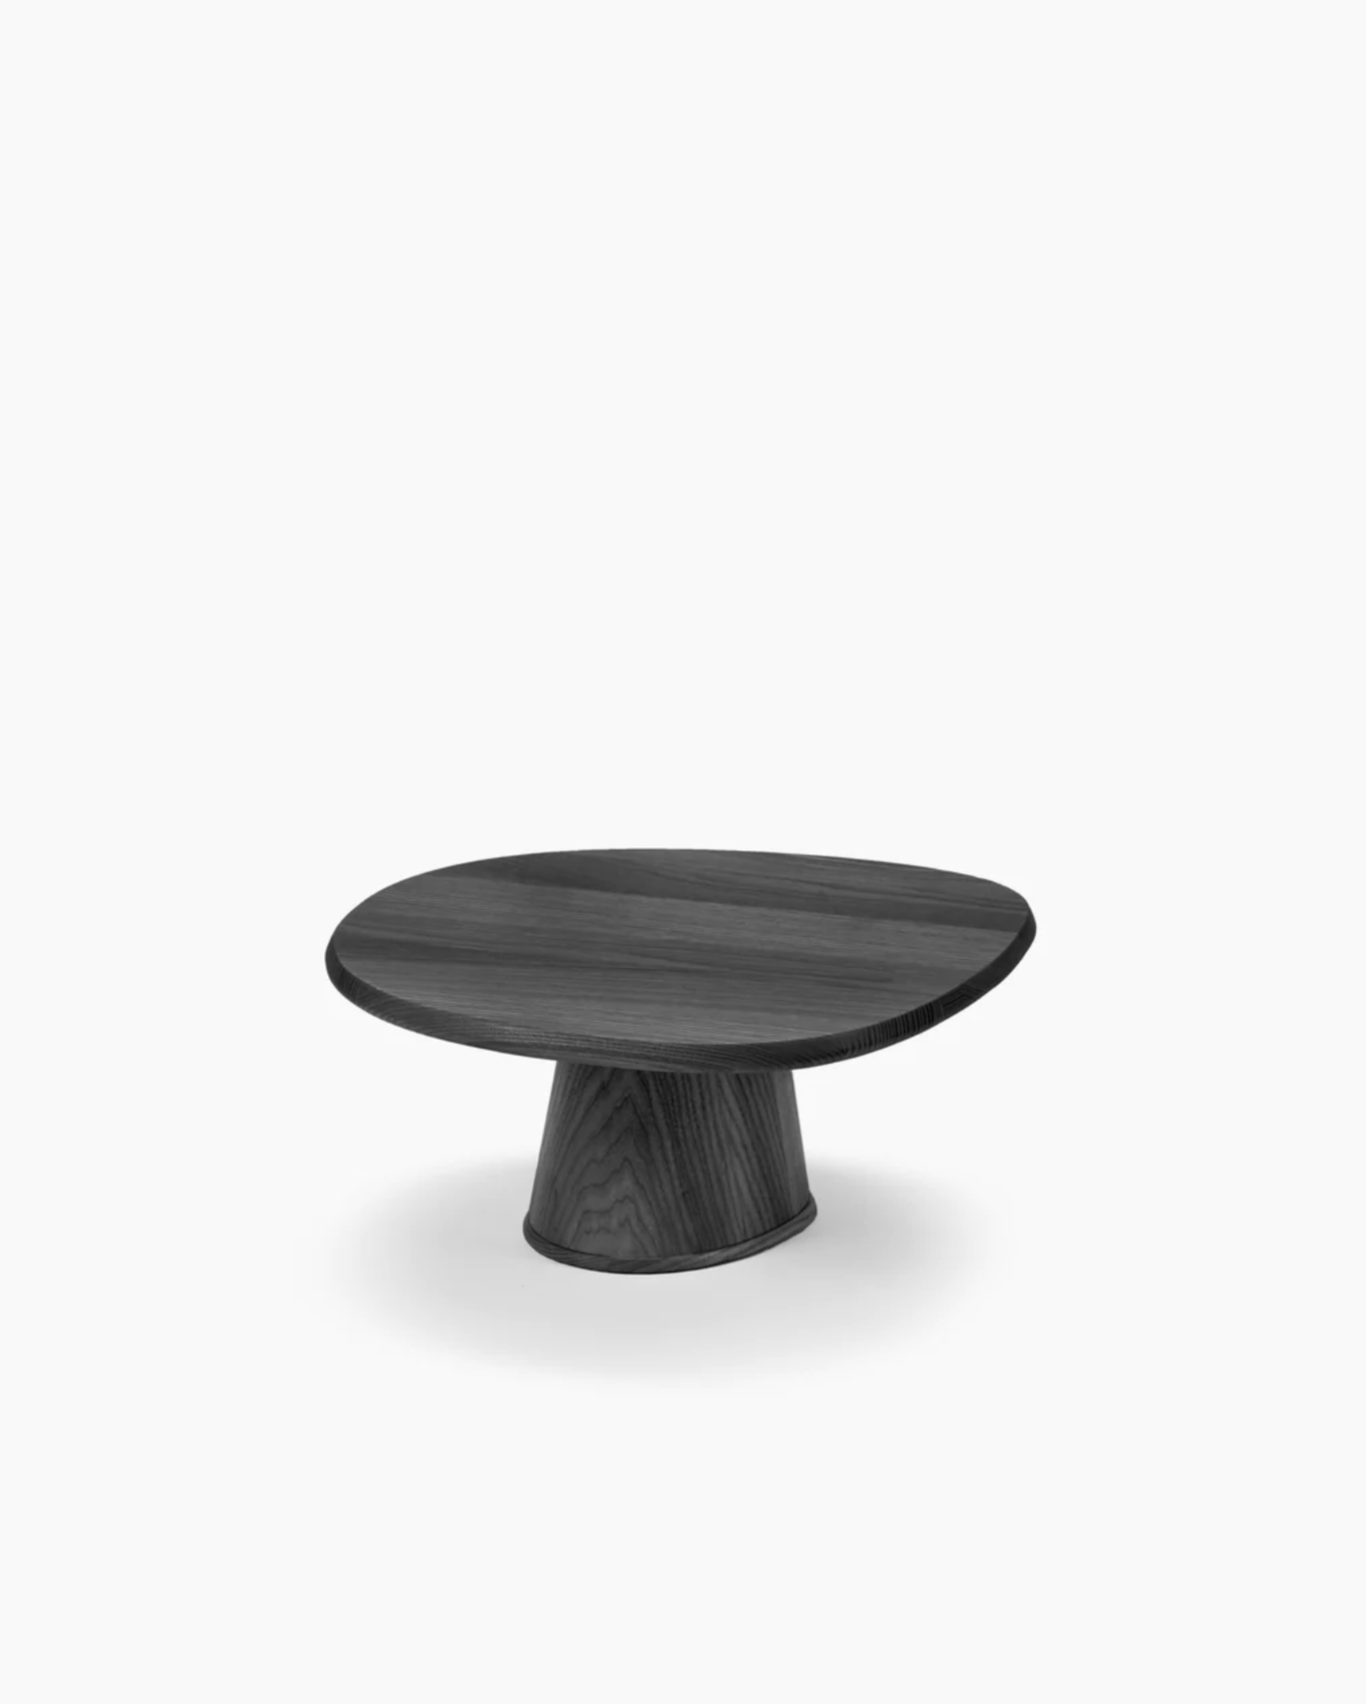 Organic Cake stand by Kelly Wearstler